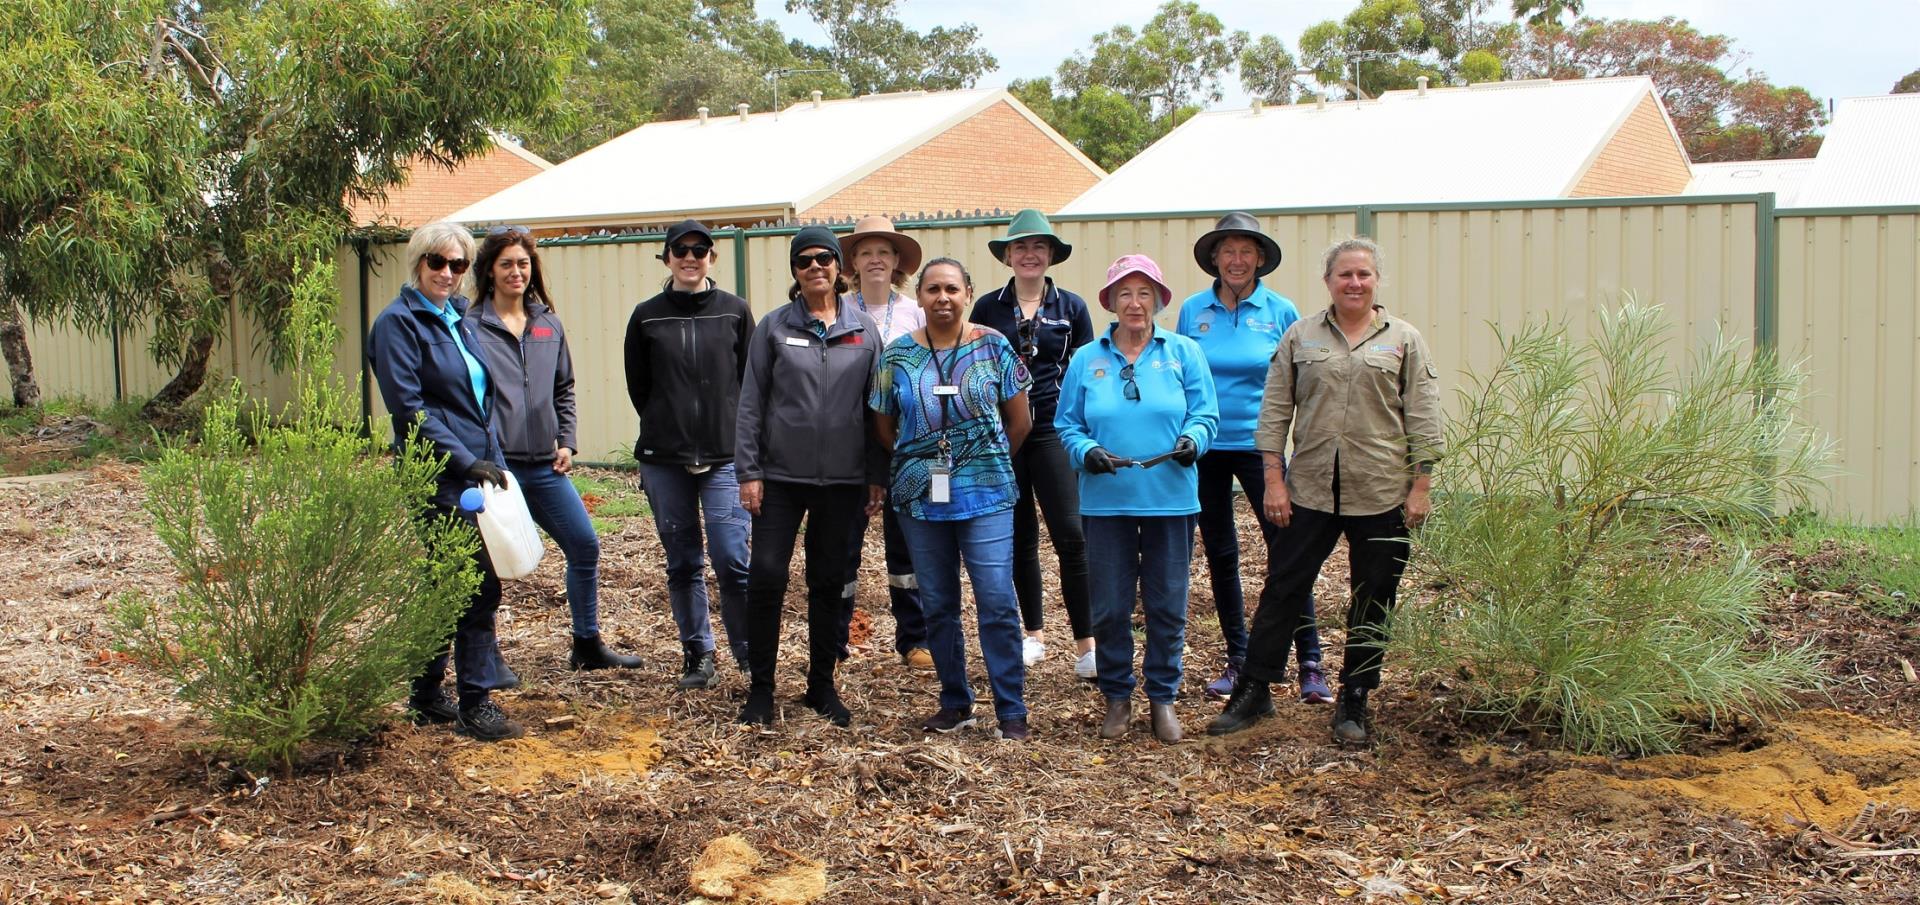 Staff from the Department of Communities, Centacare, the City of Greater Geraldton along with Community Nursery Volunteers among the trees and seedlings they planted at the newly created open space on Bogle Way in Spalding.